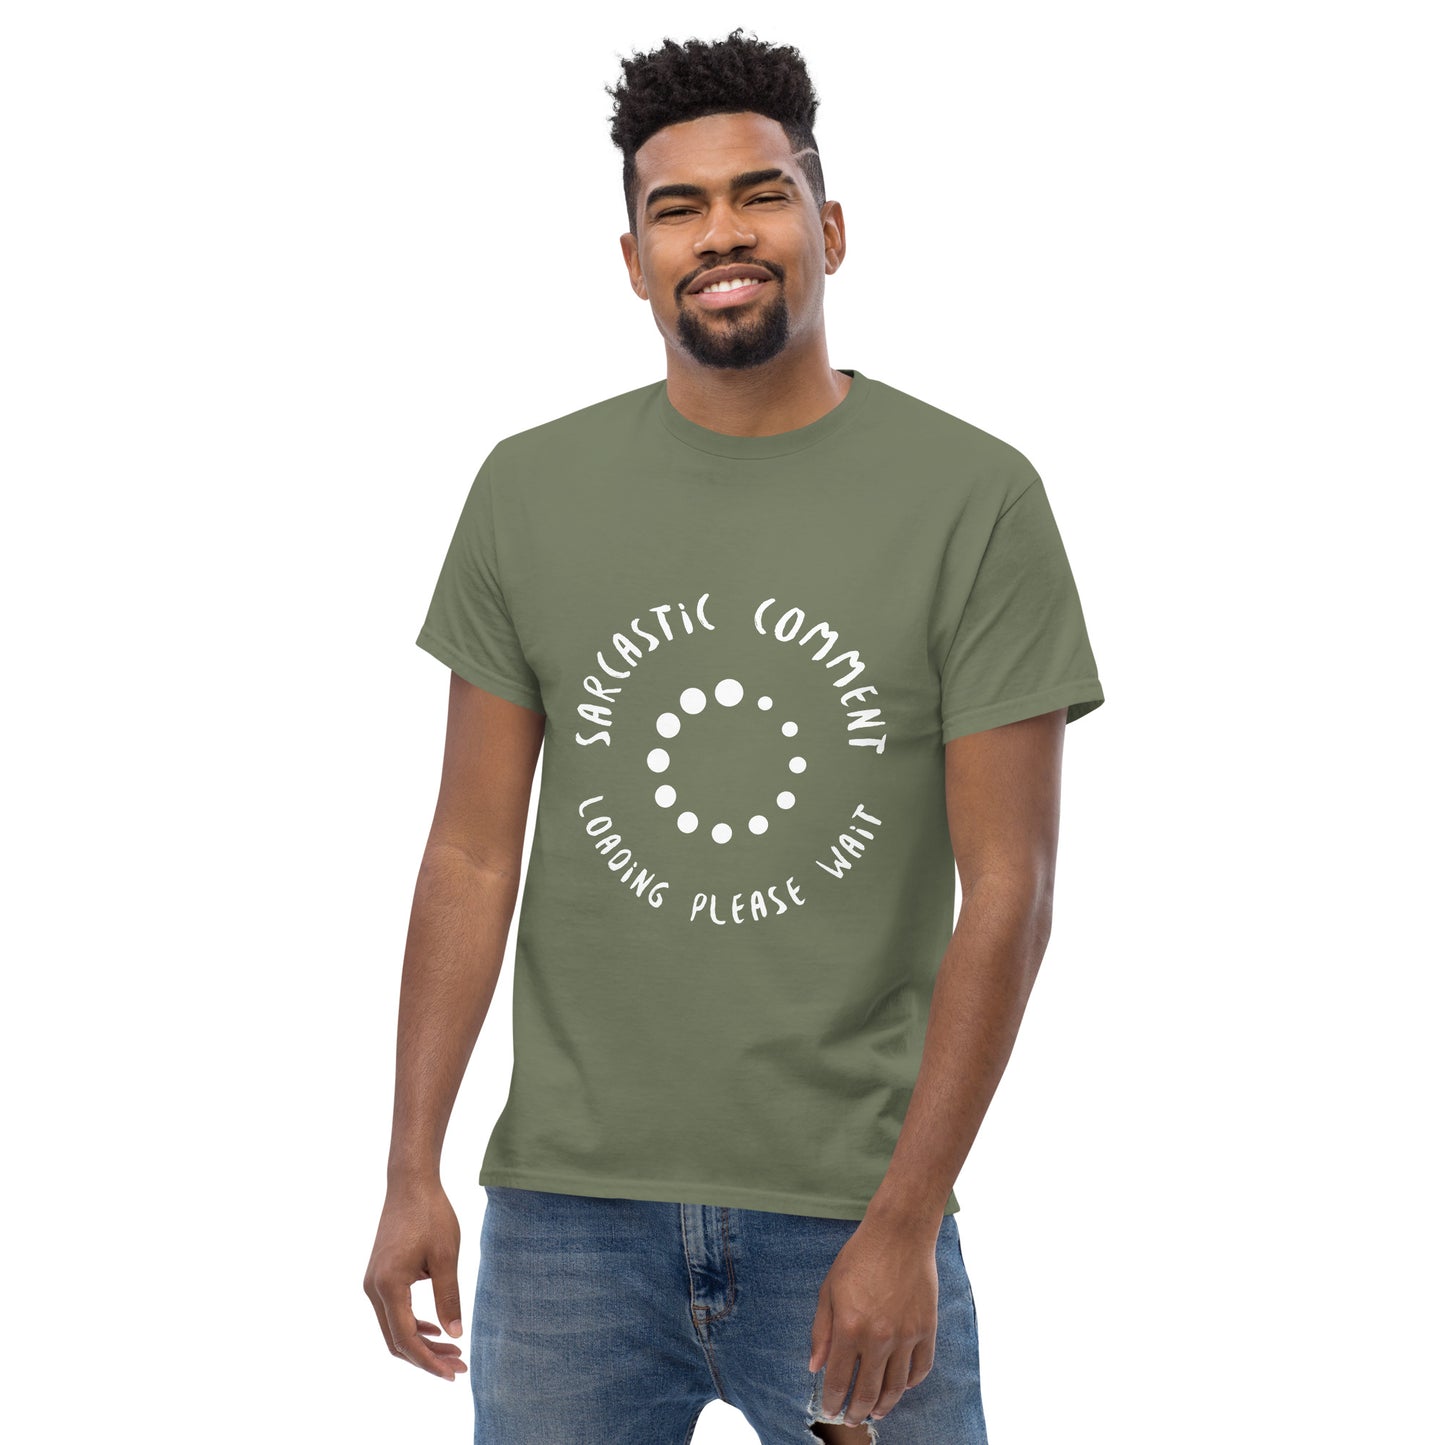 Men with Military green T-shirt with the text in a circle "Sarcastic comment loading please wait"